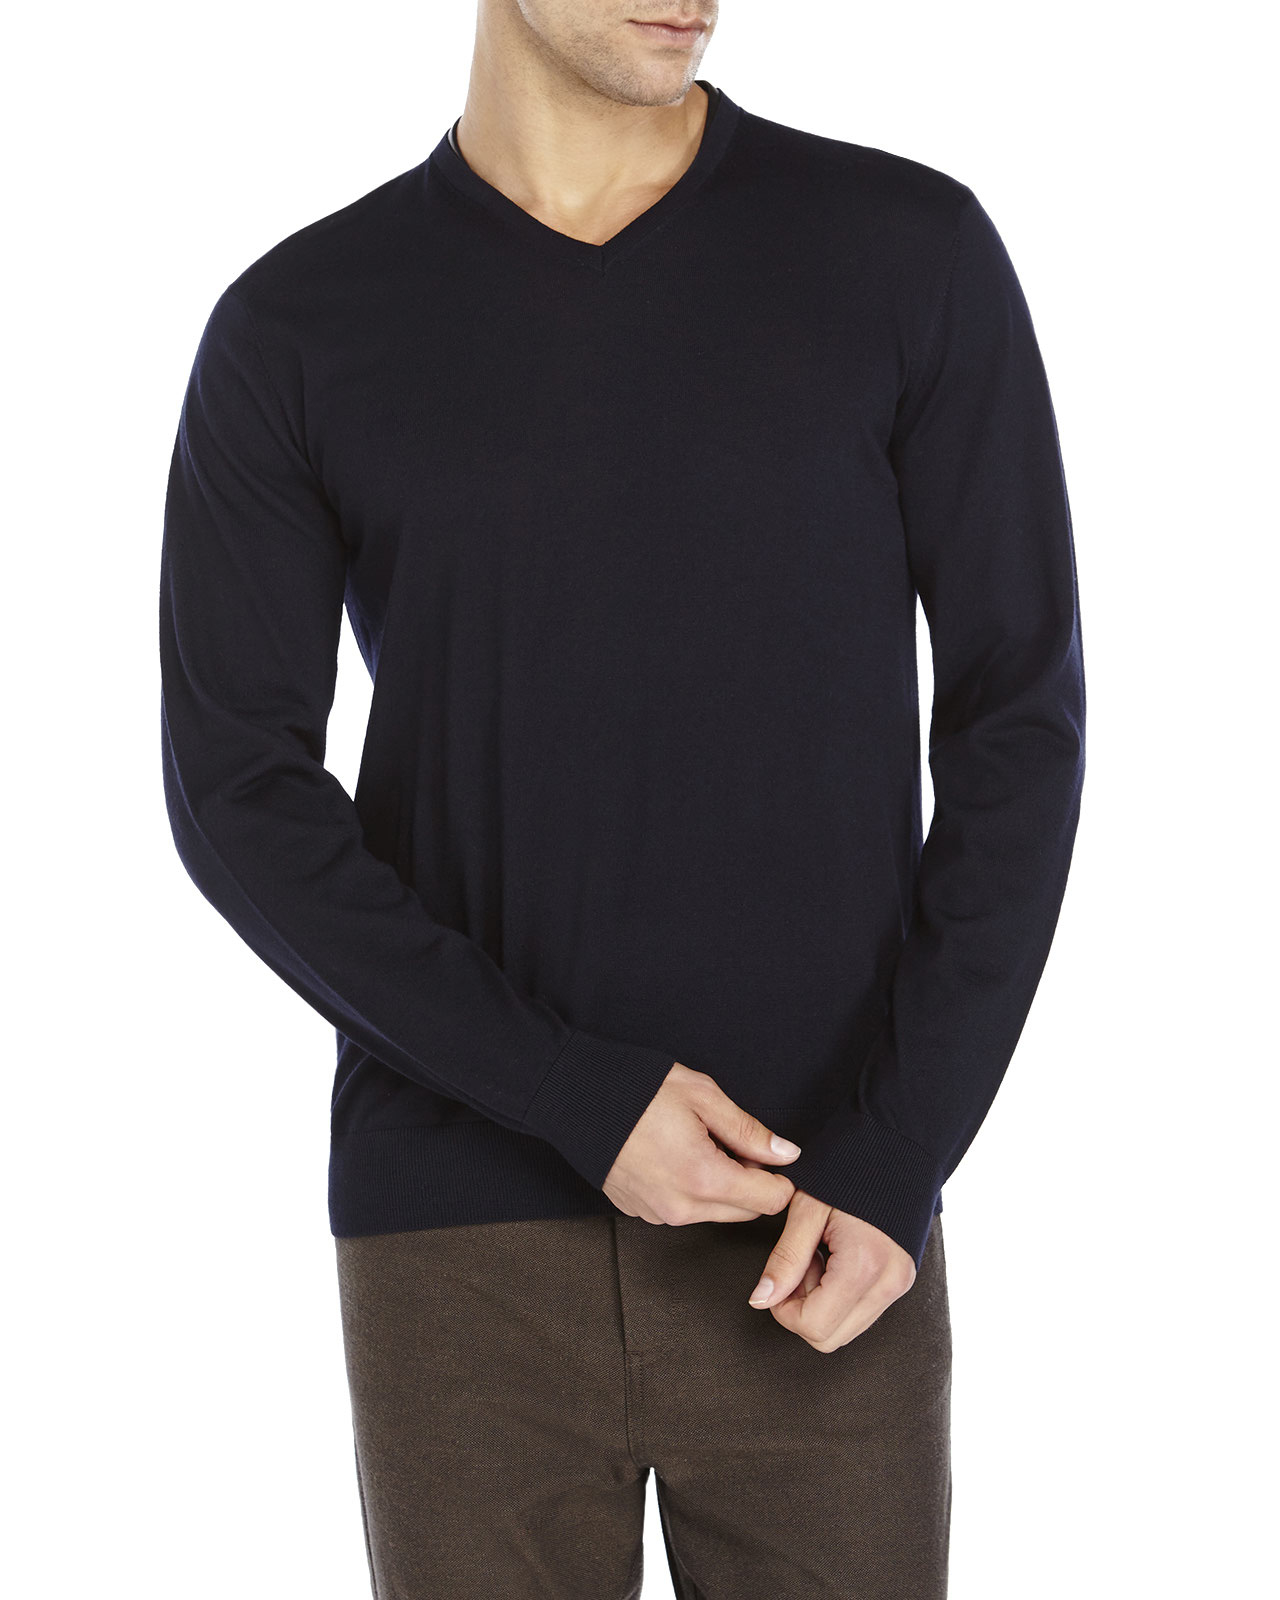 Lyst - The Kooples Navy V-Neck Leather Trim Sweater in Blue for Men